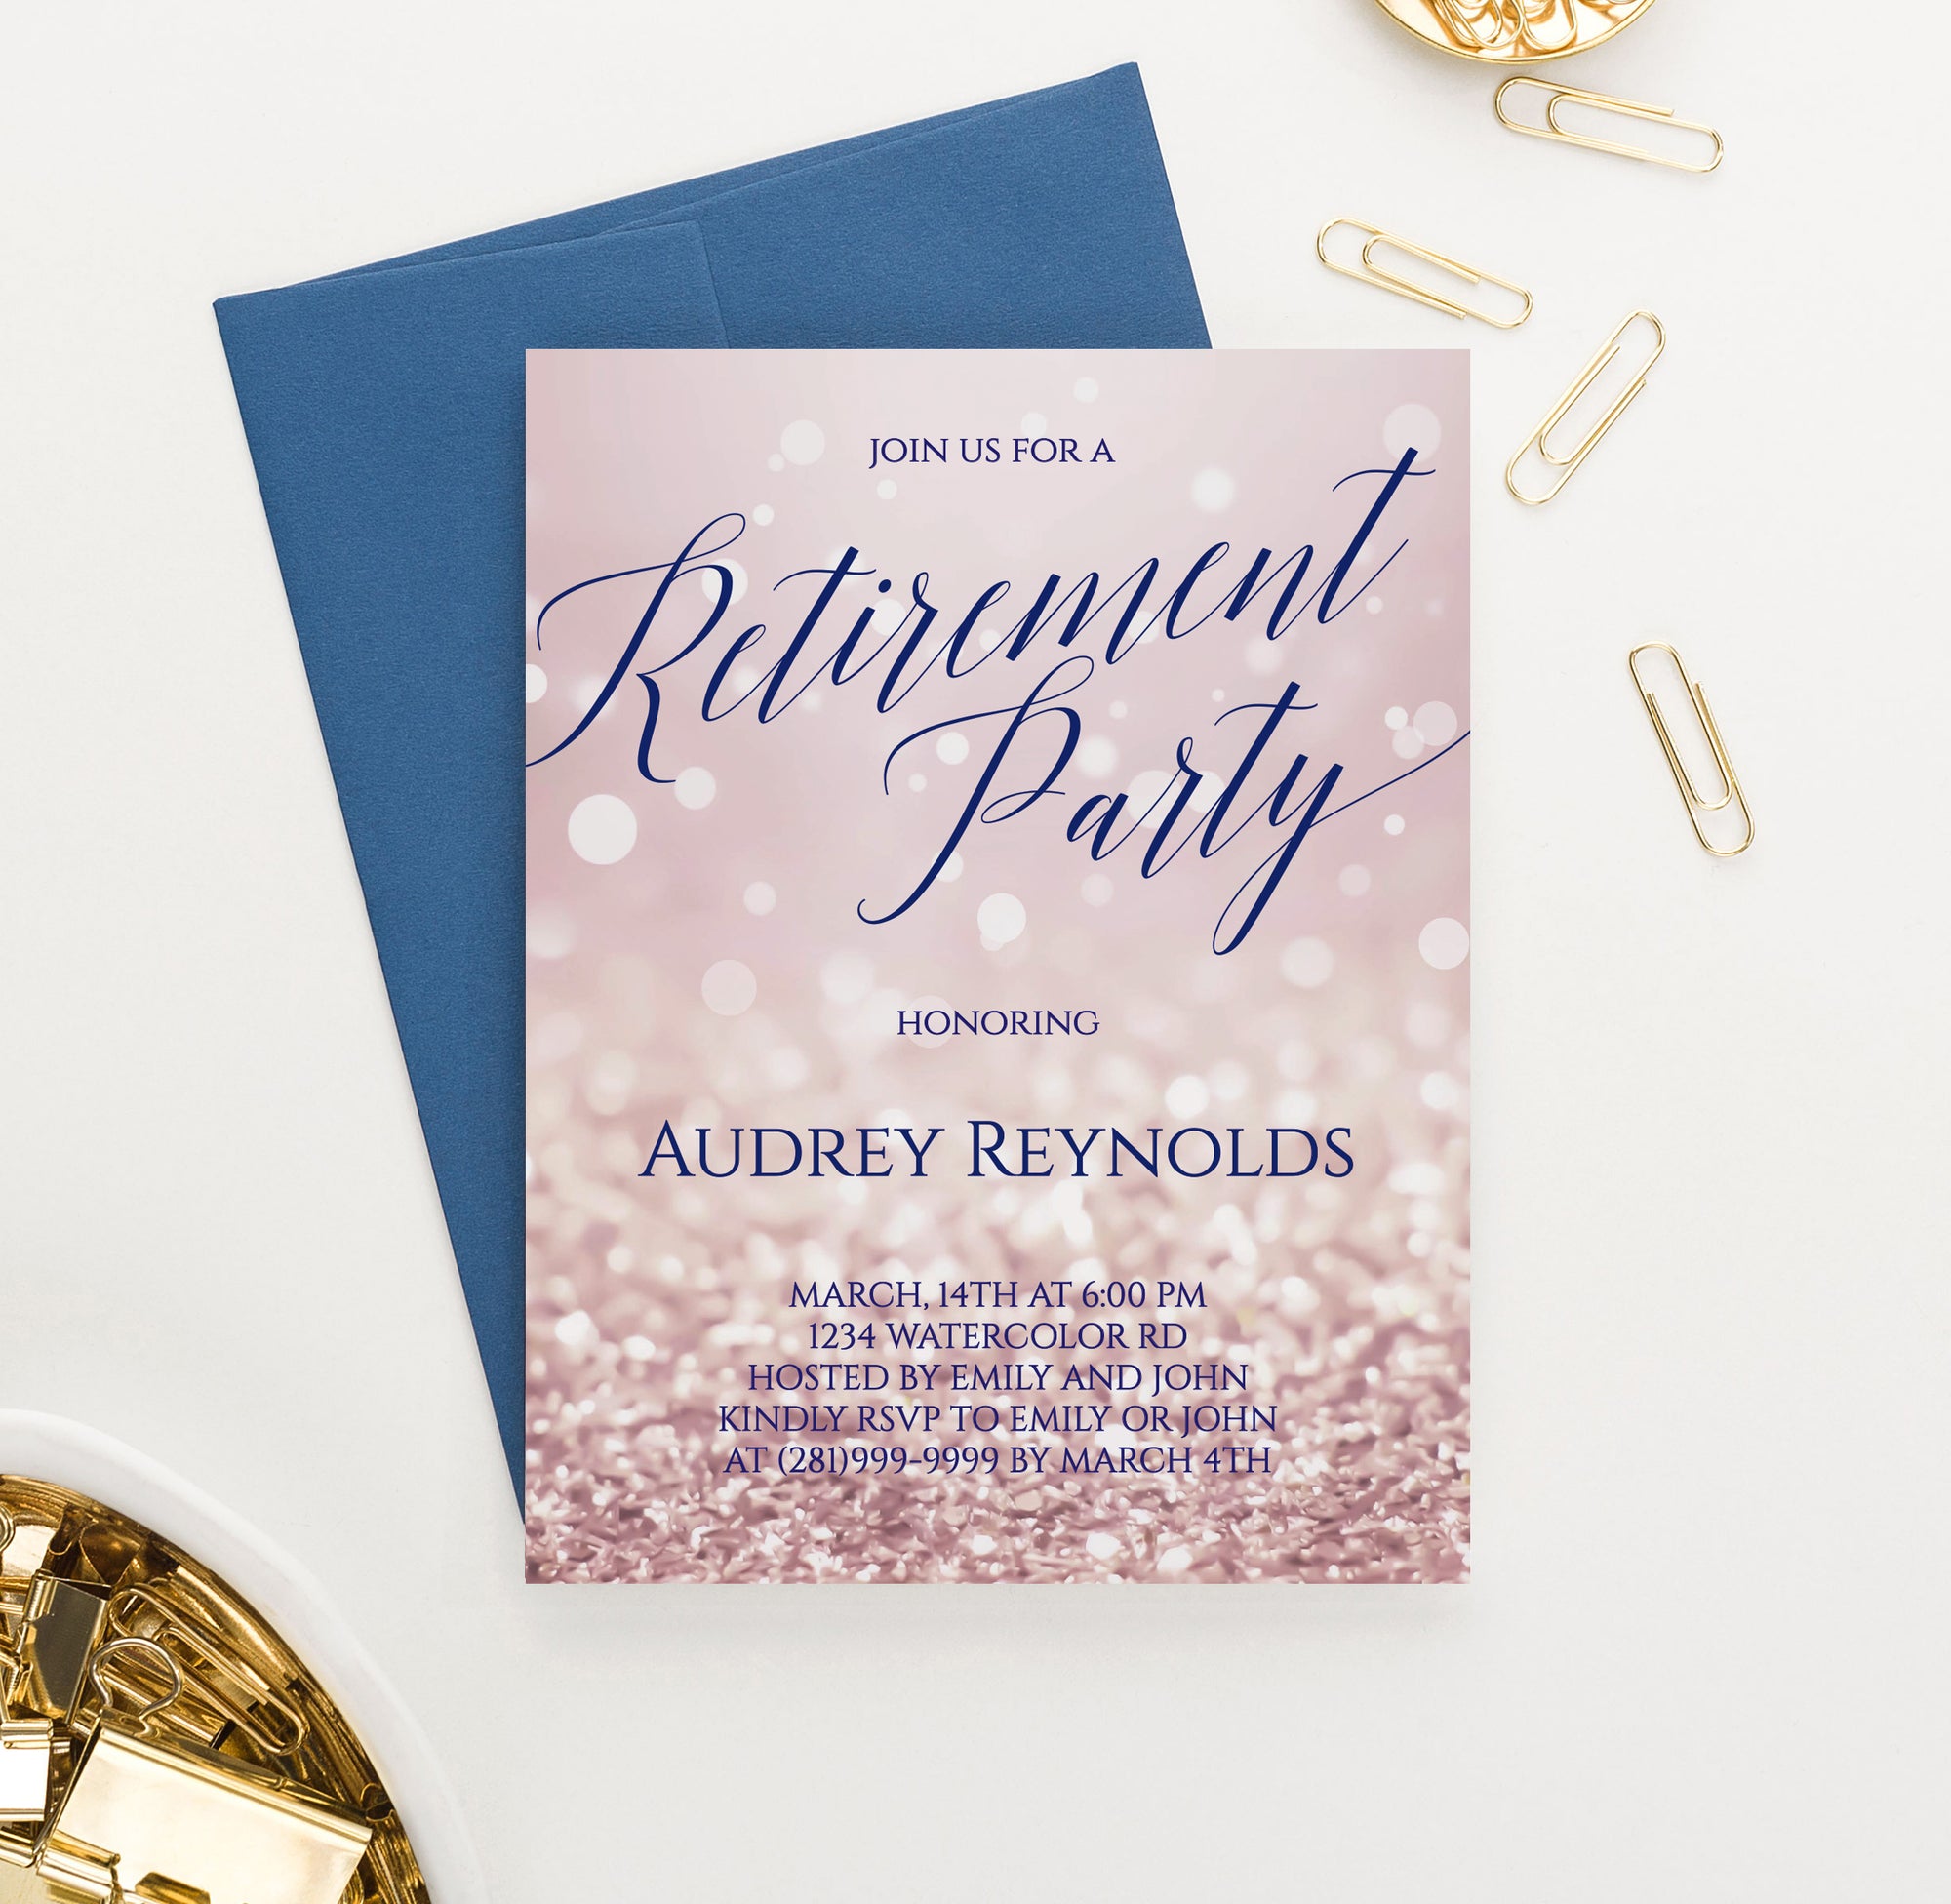 Rose Gold Personalized Retirement Party Invitations